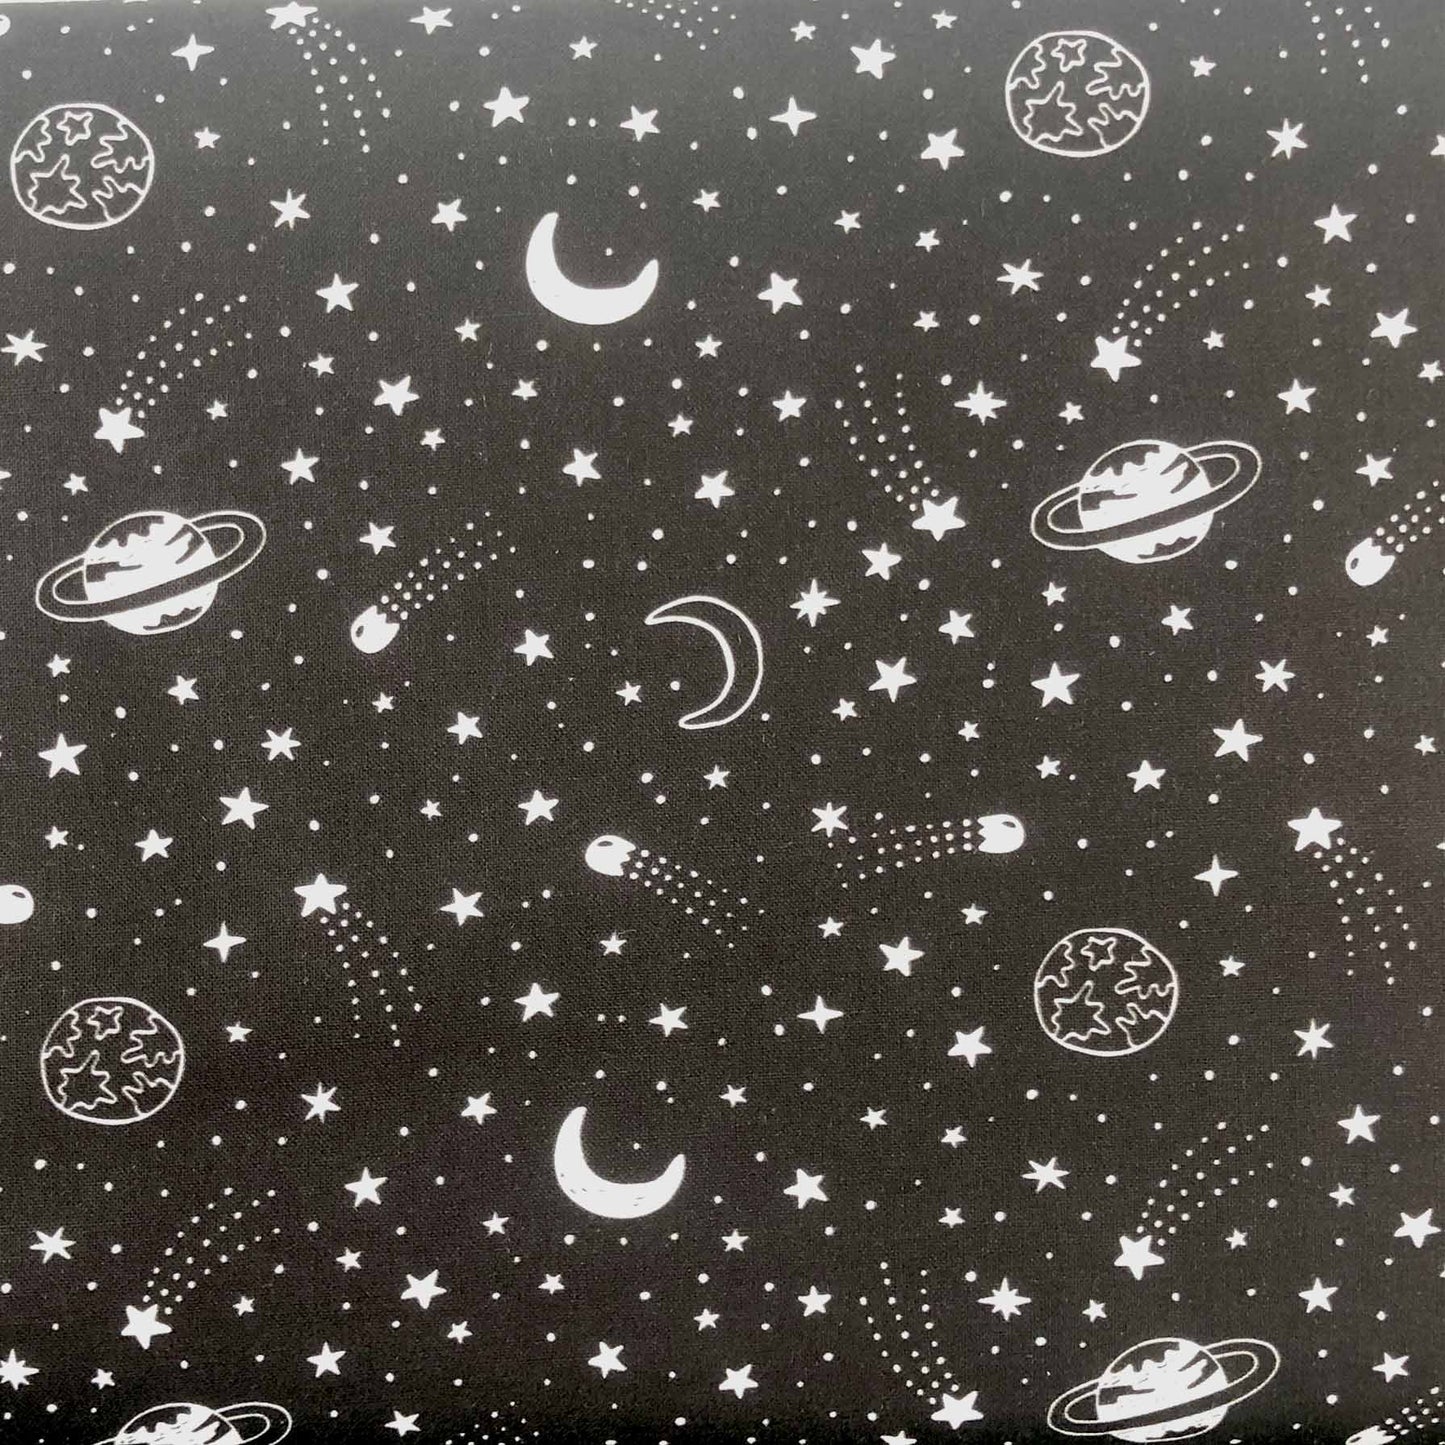 Outer Space Cotton Print - Shooting Star